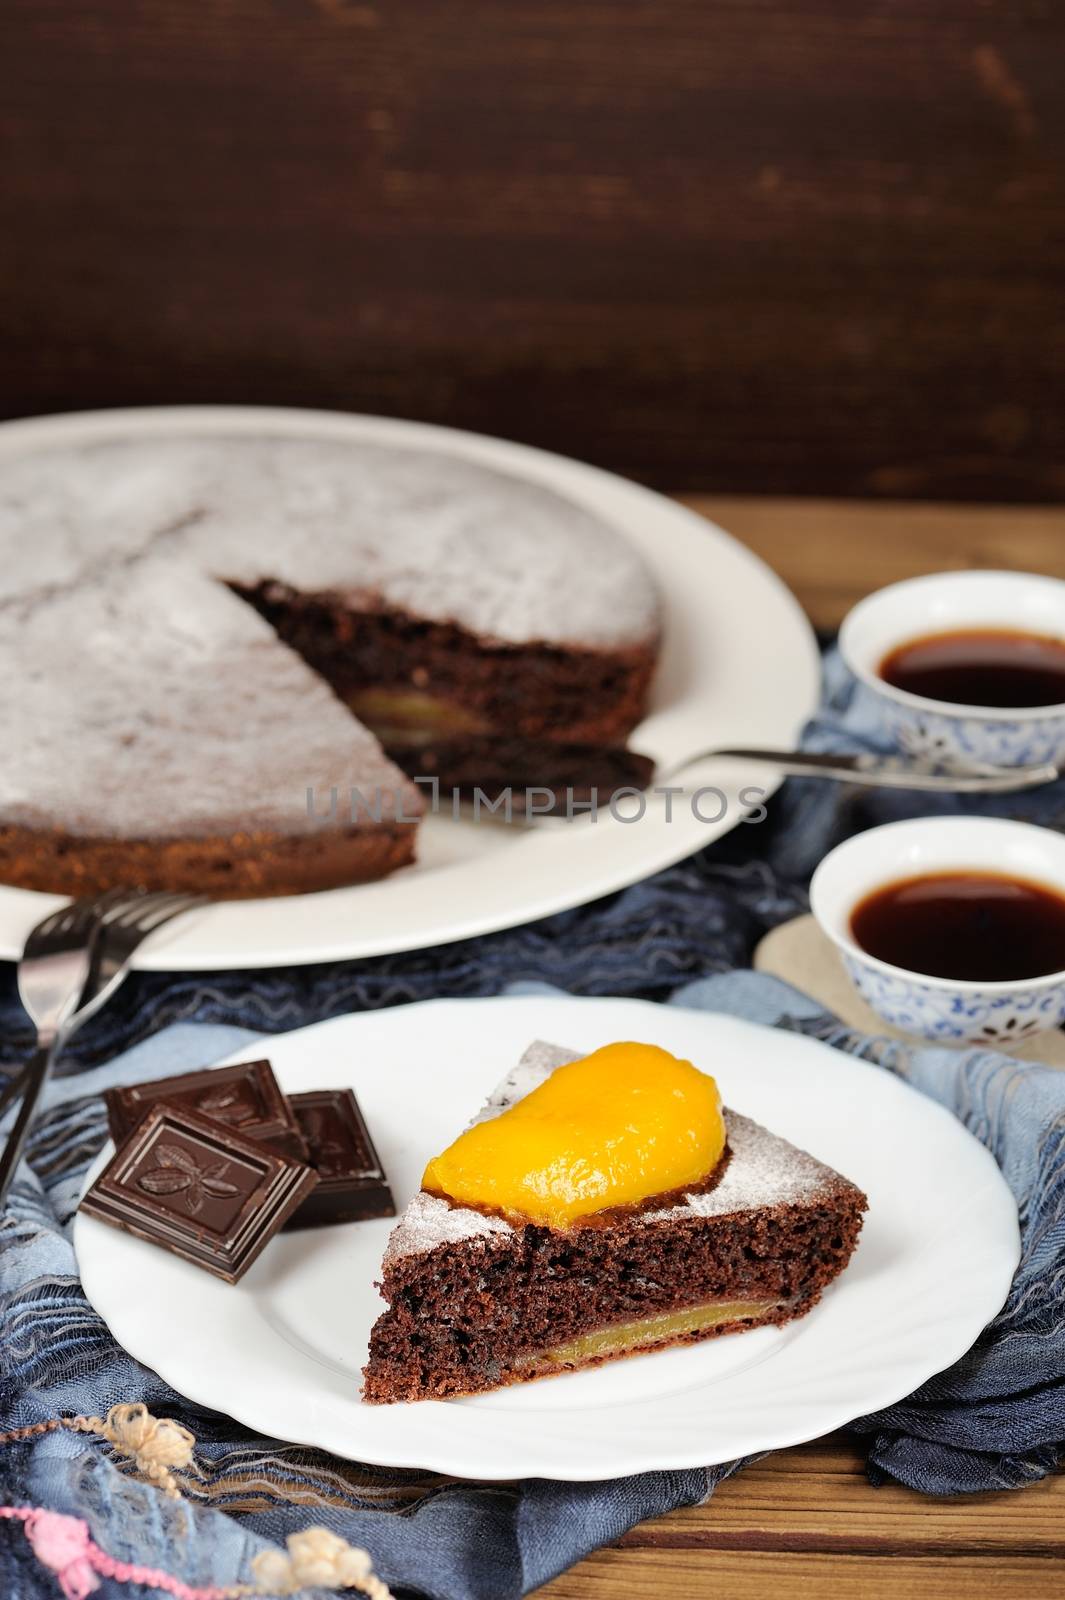 Chocolate cake with mango and black tea on blue cloth with space background vertical